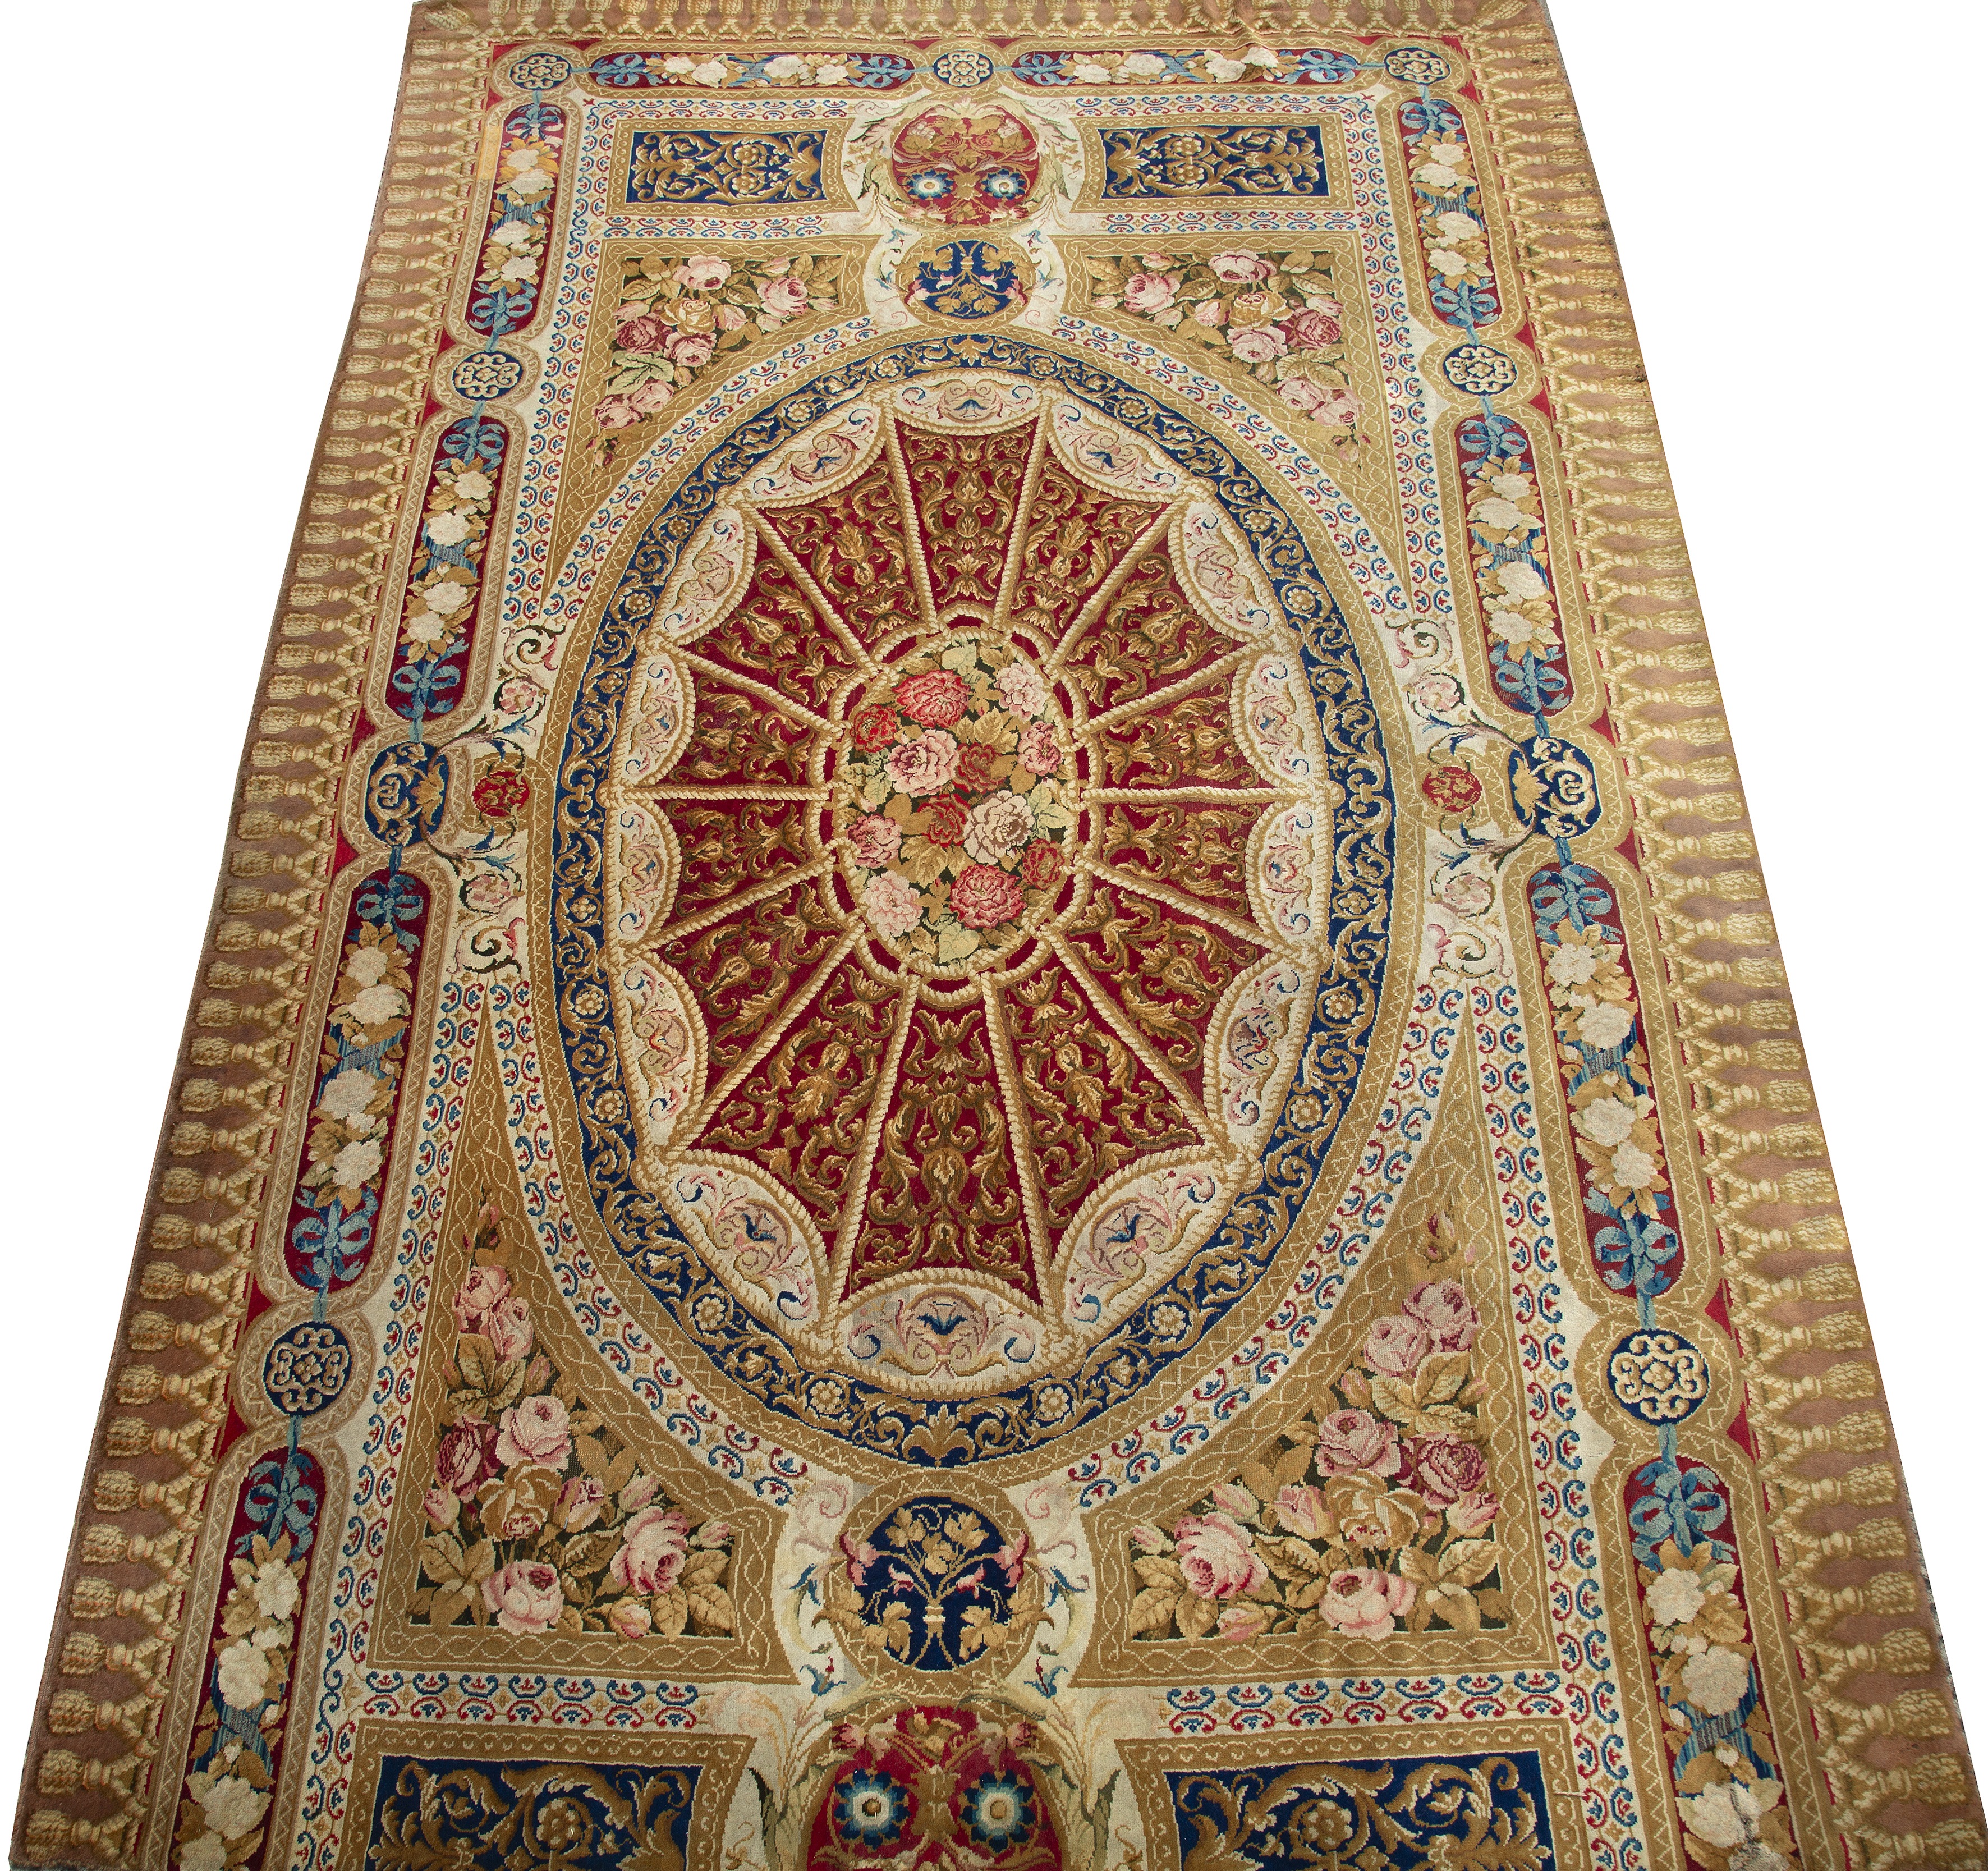 An early to mid 19th century English Axminster carpet fragment 284cm x 438cm Purchased from the